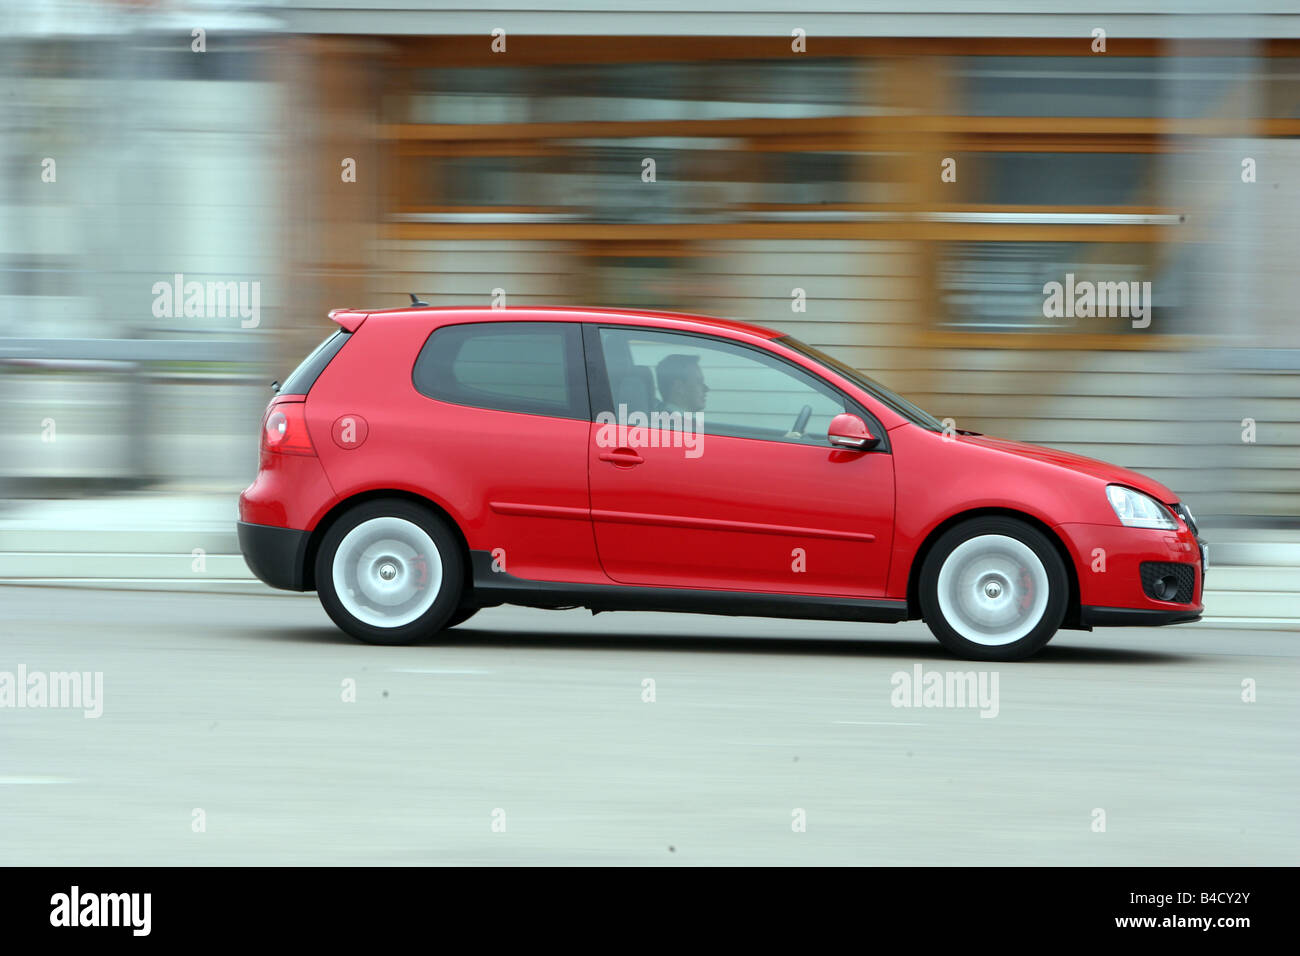 Vw volkswagen golf gti model hi-res stock photography and images - Alamy